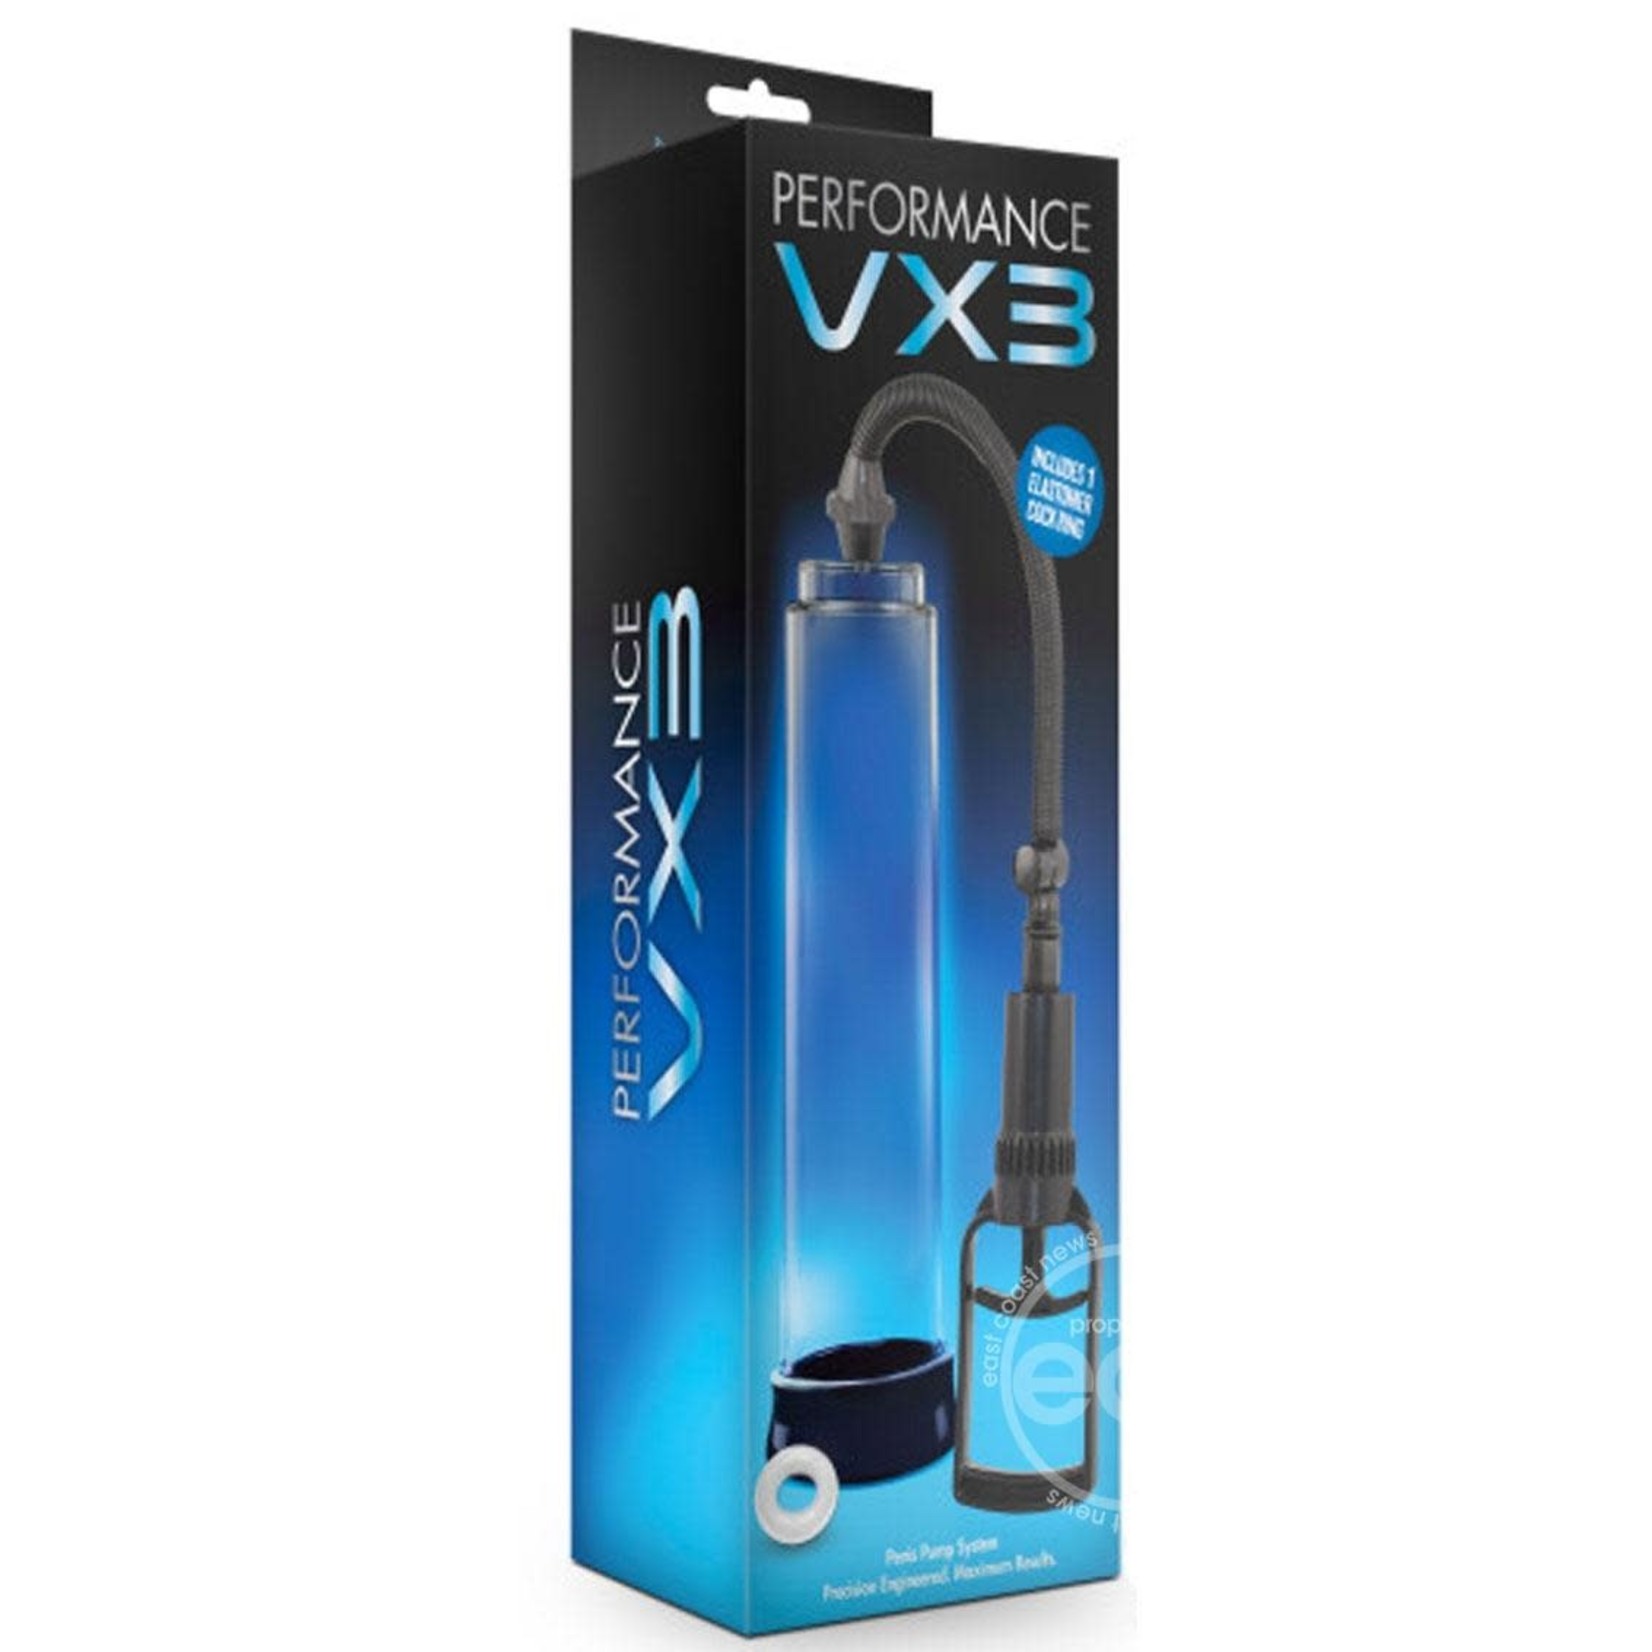 Performance VX3 Male Enhancement Penis Pump System 10in - Clear